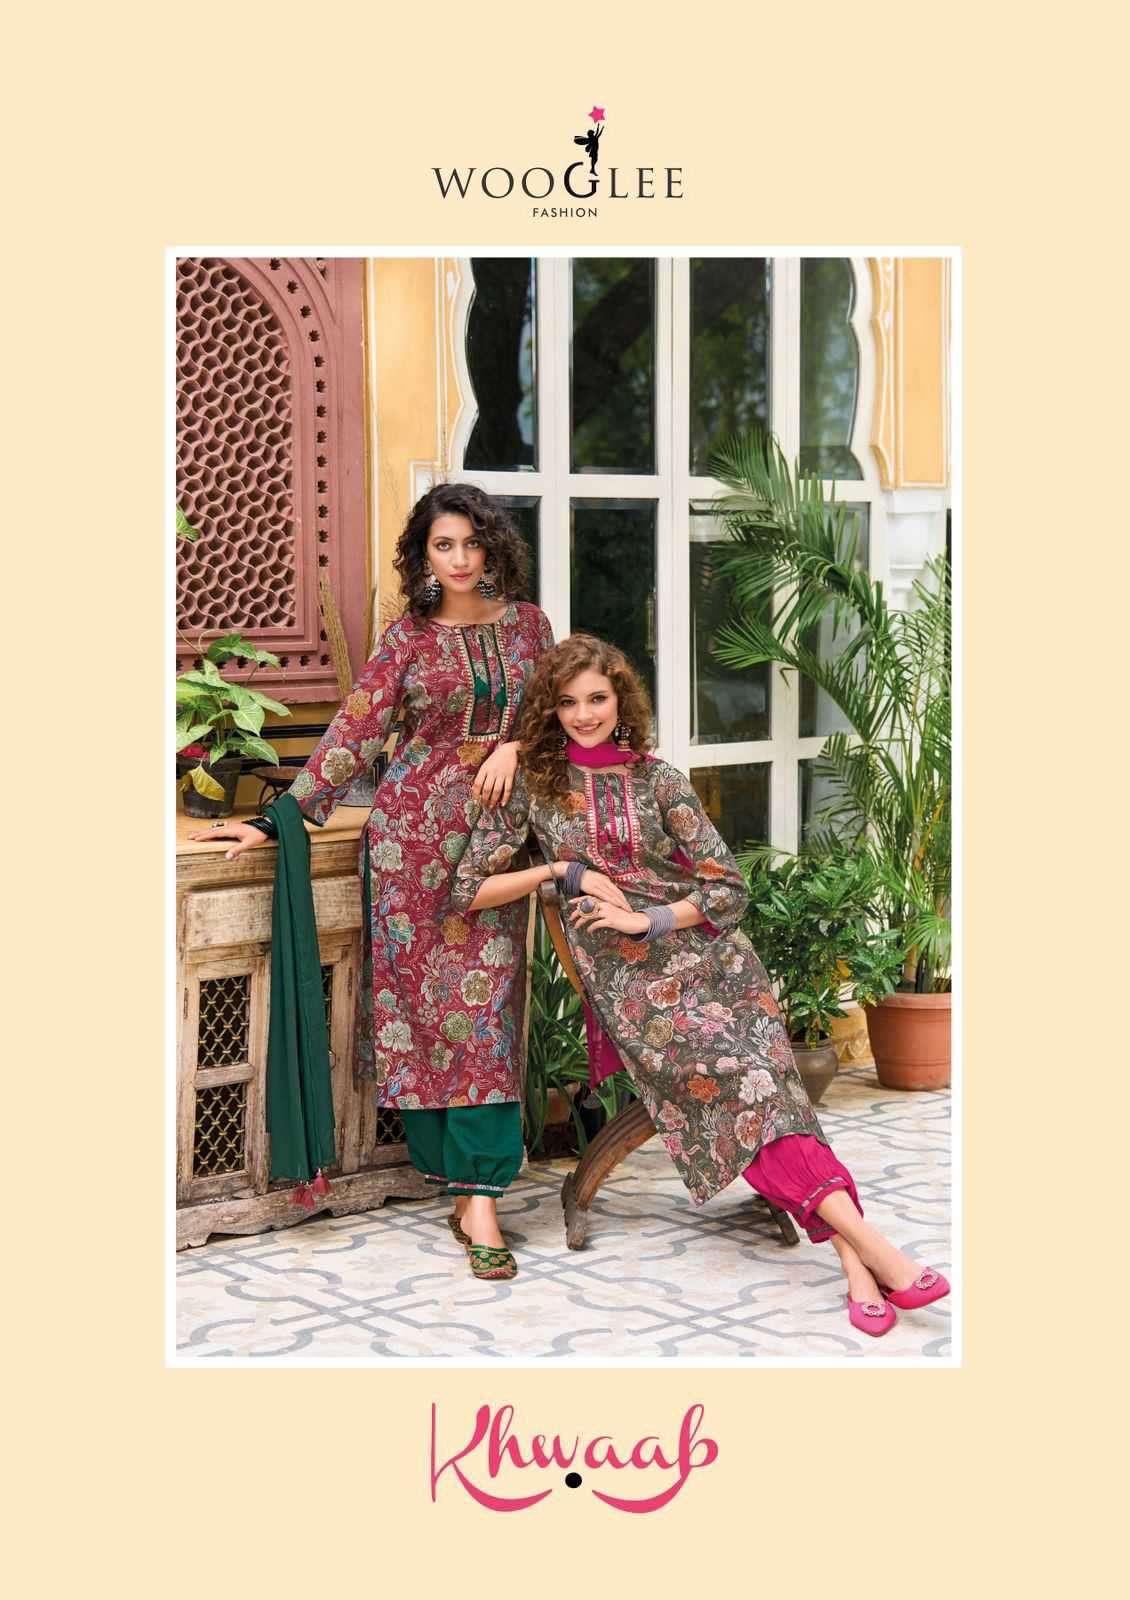 Wooglee Khwaab Exclusive Designs Readymade Dress Festive Collection